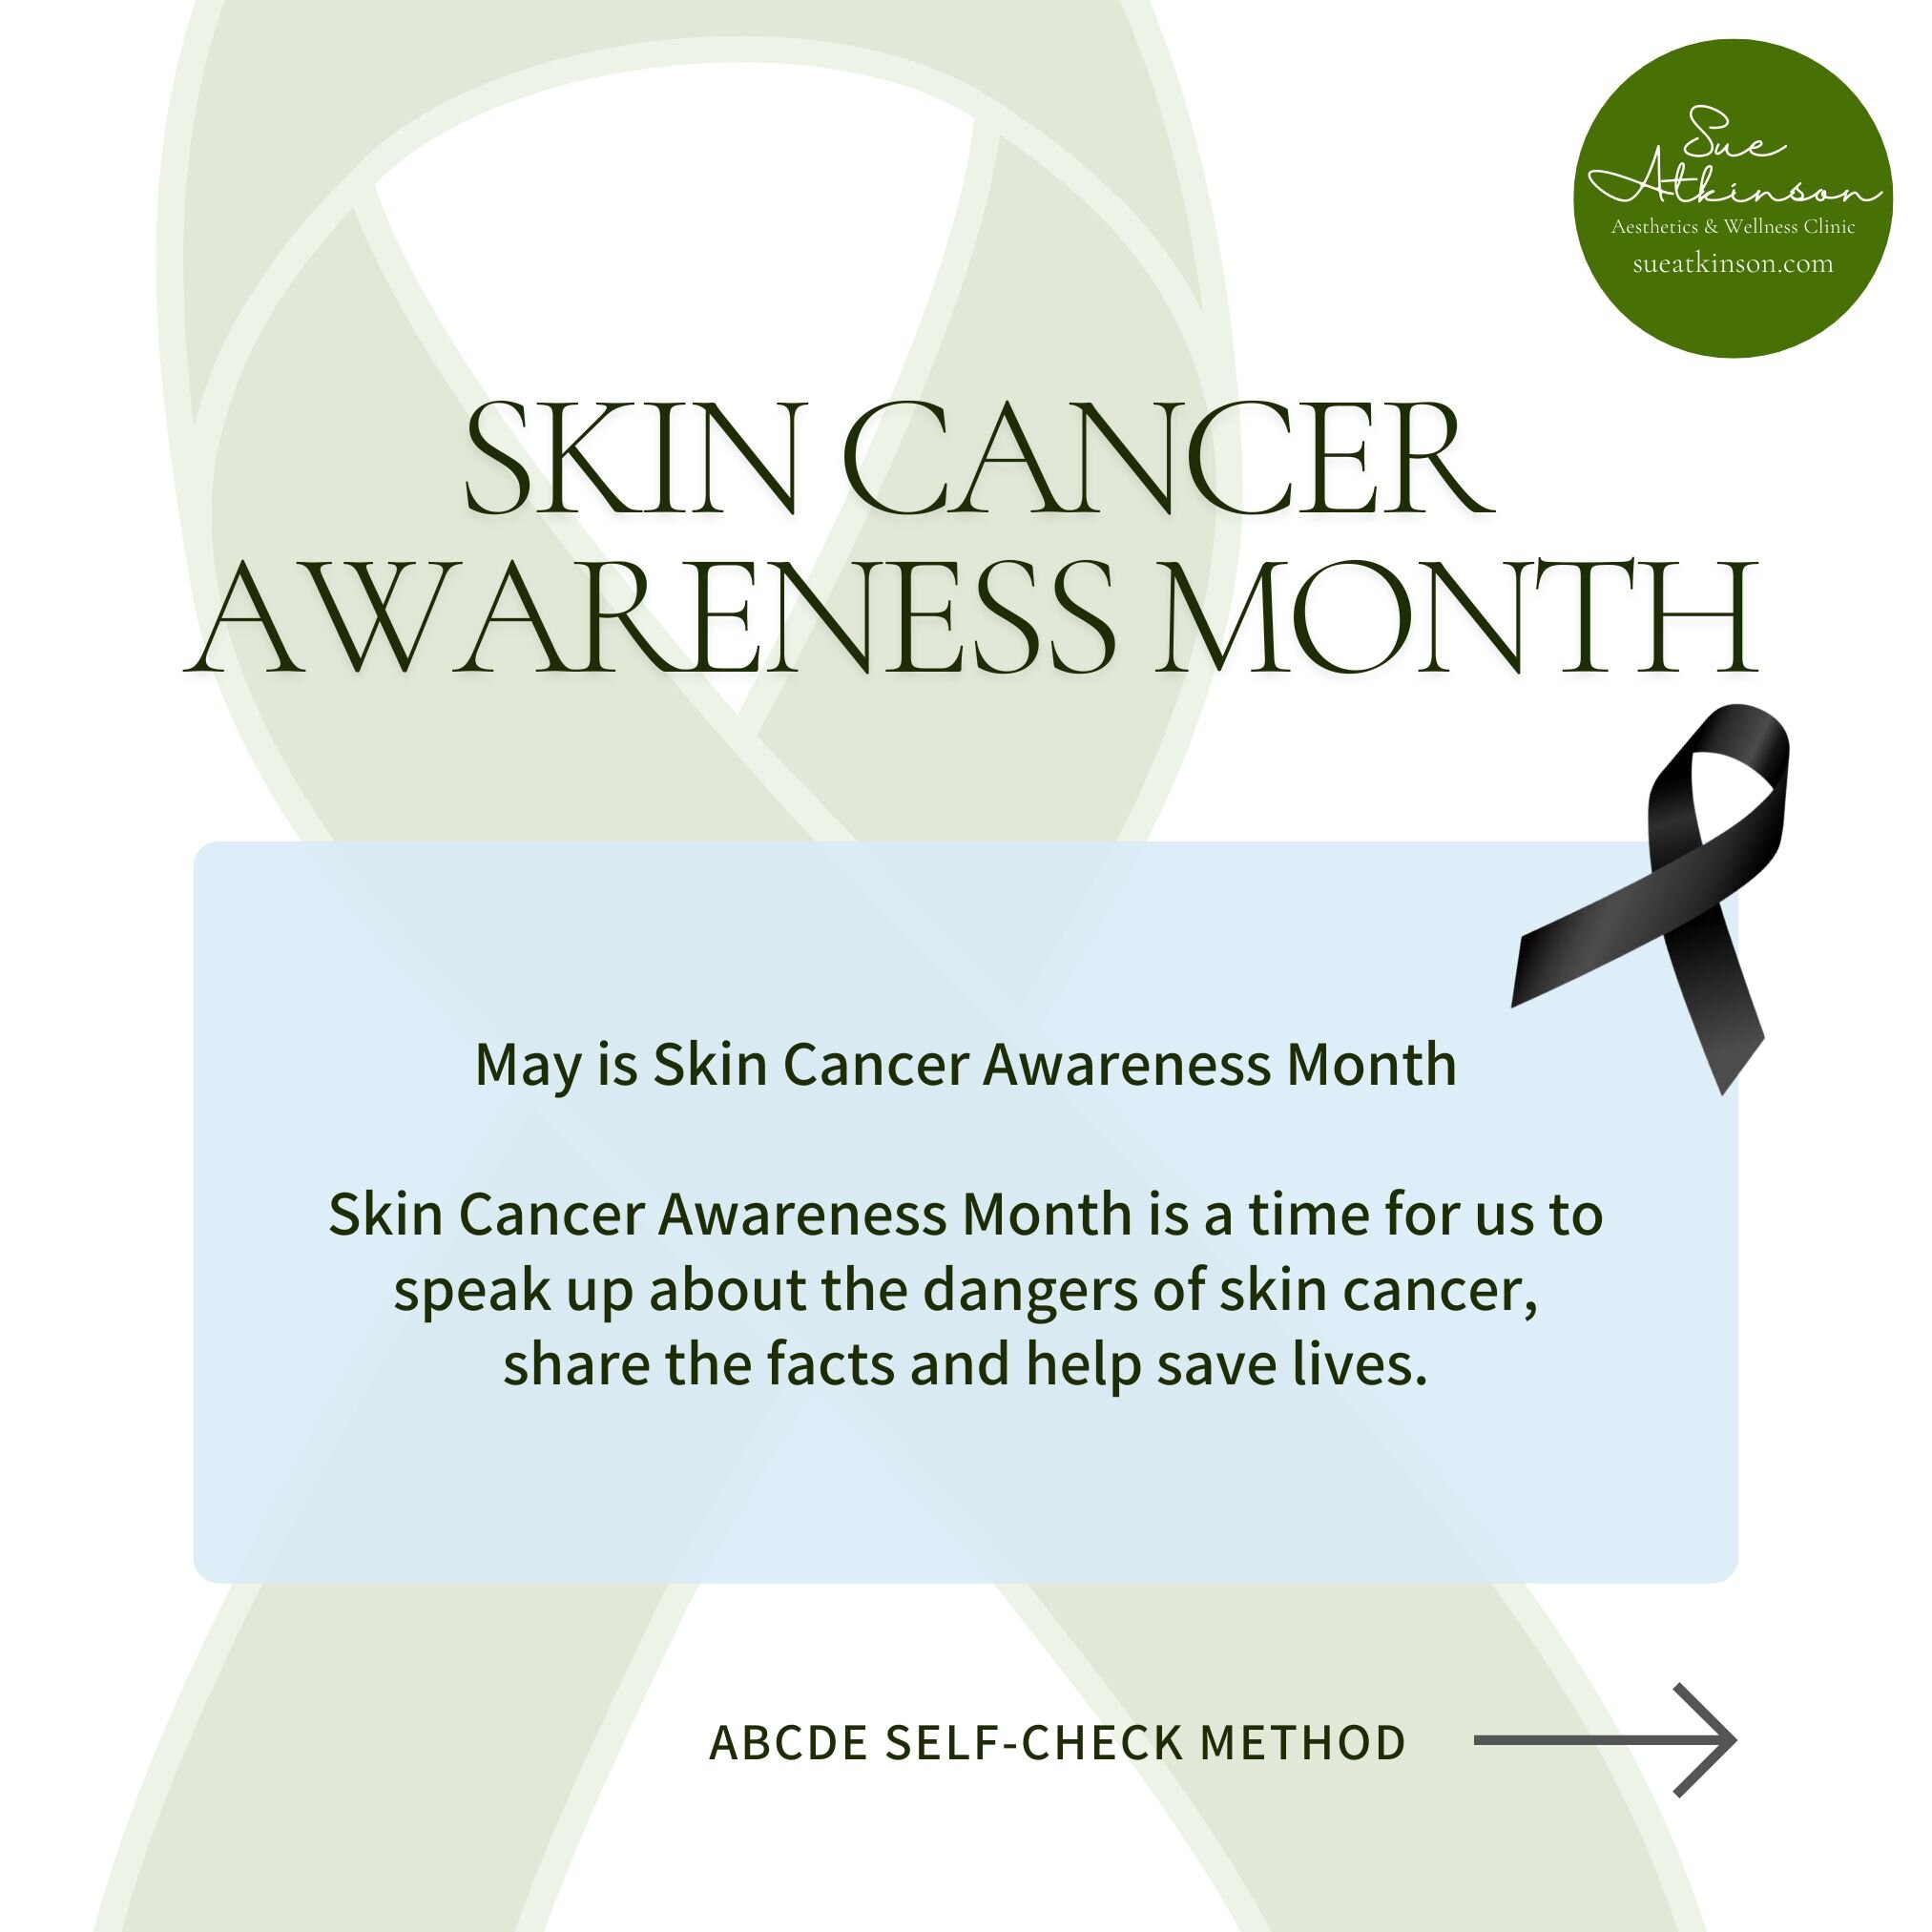 Did you know that May is Skin Cancer Awareness month?